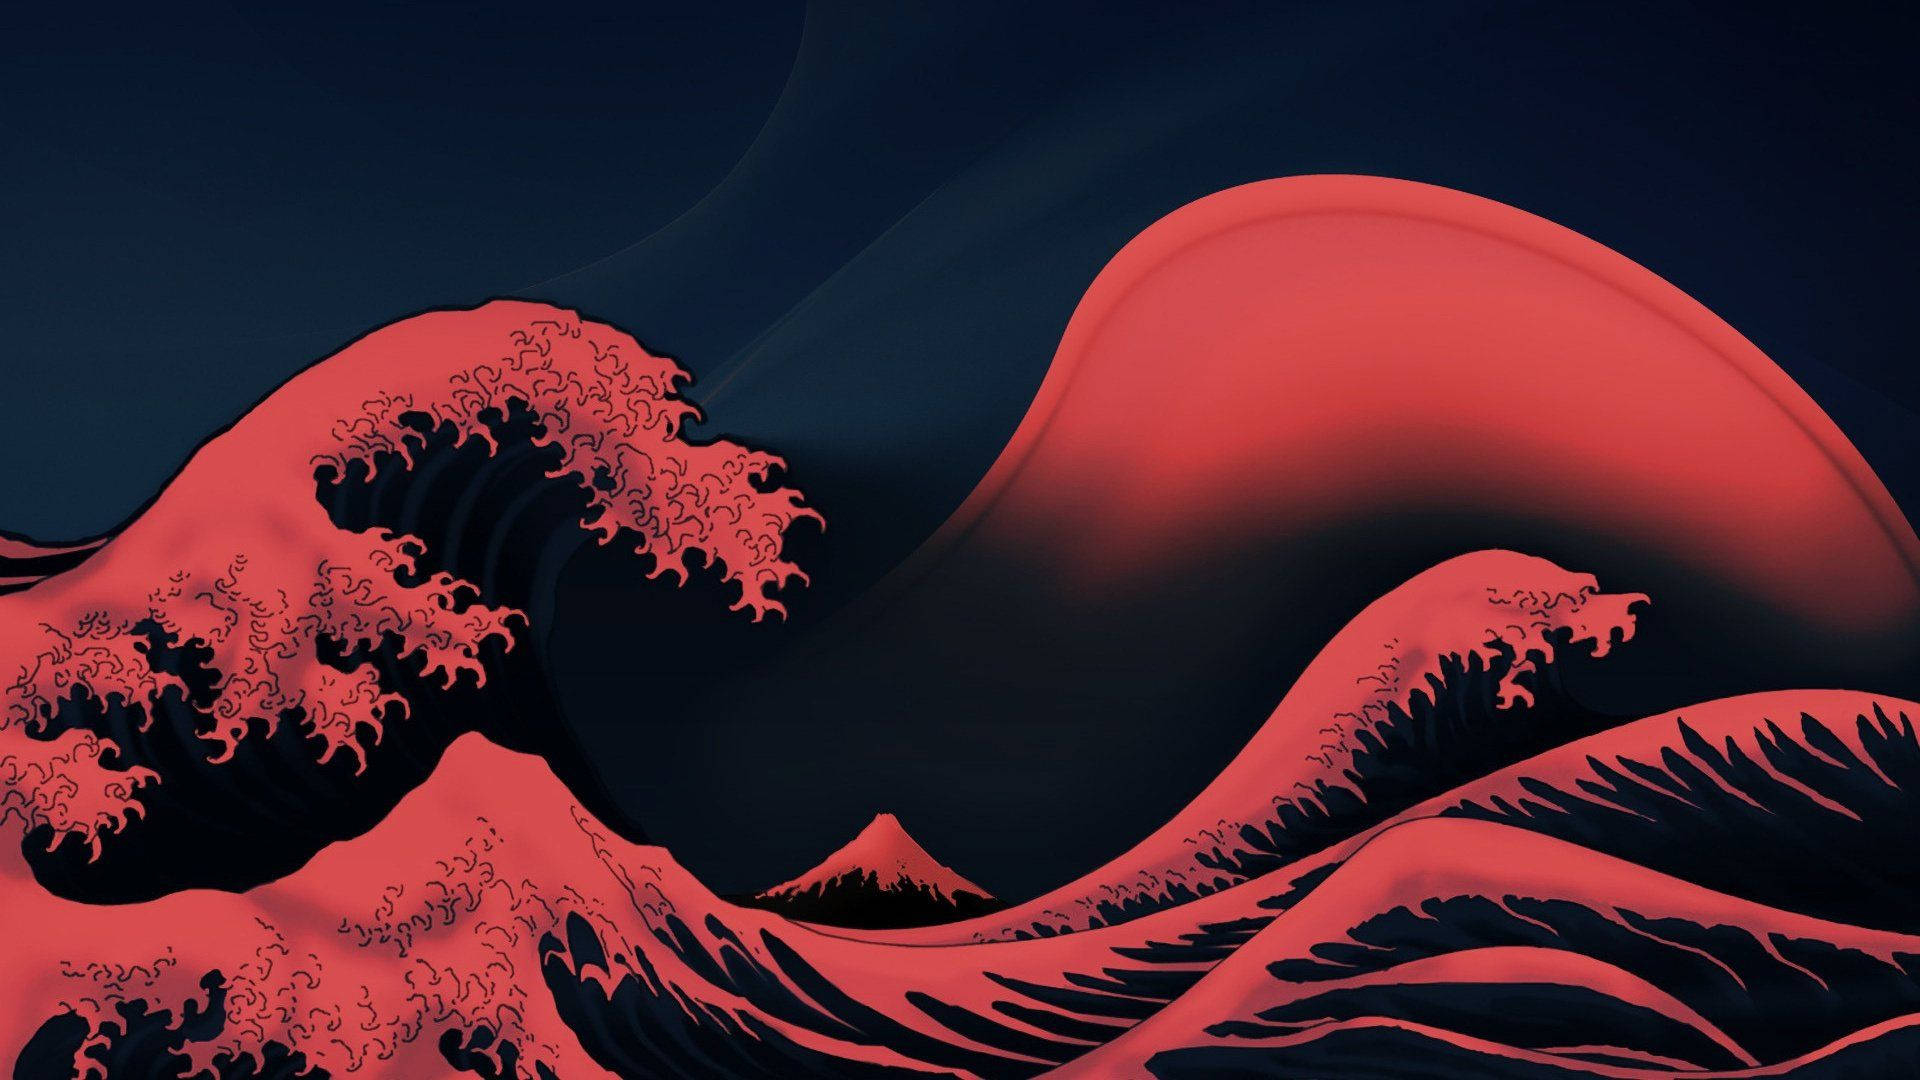 Download Black And Red The Great Wave Off Kanagawa Wallpaper | Wallpapers .com